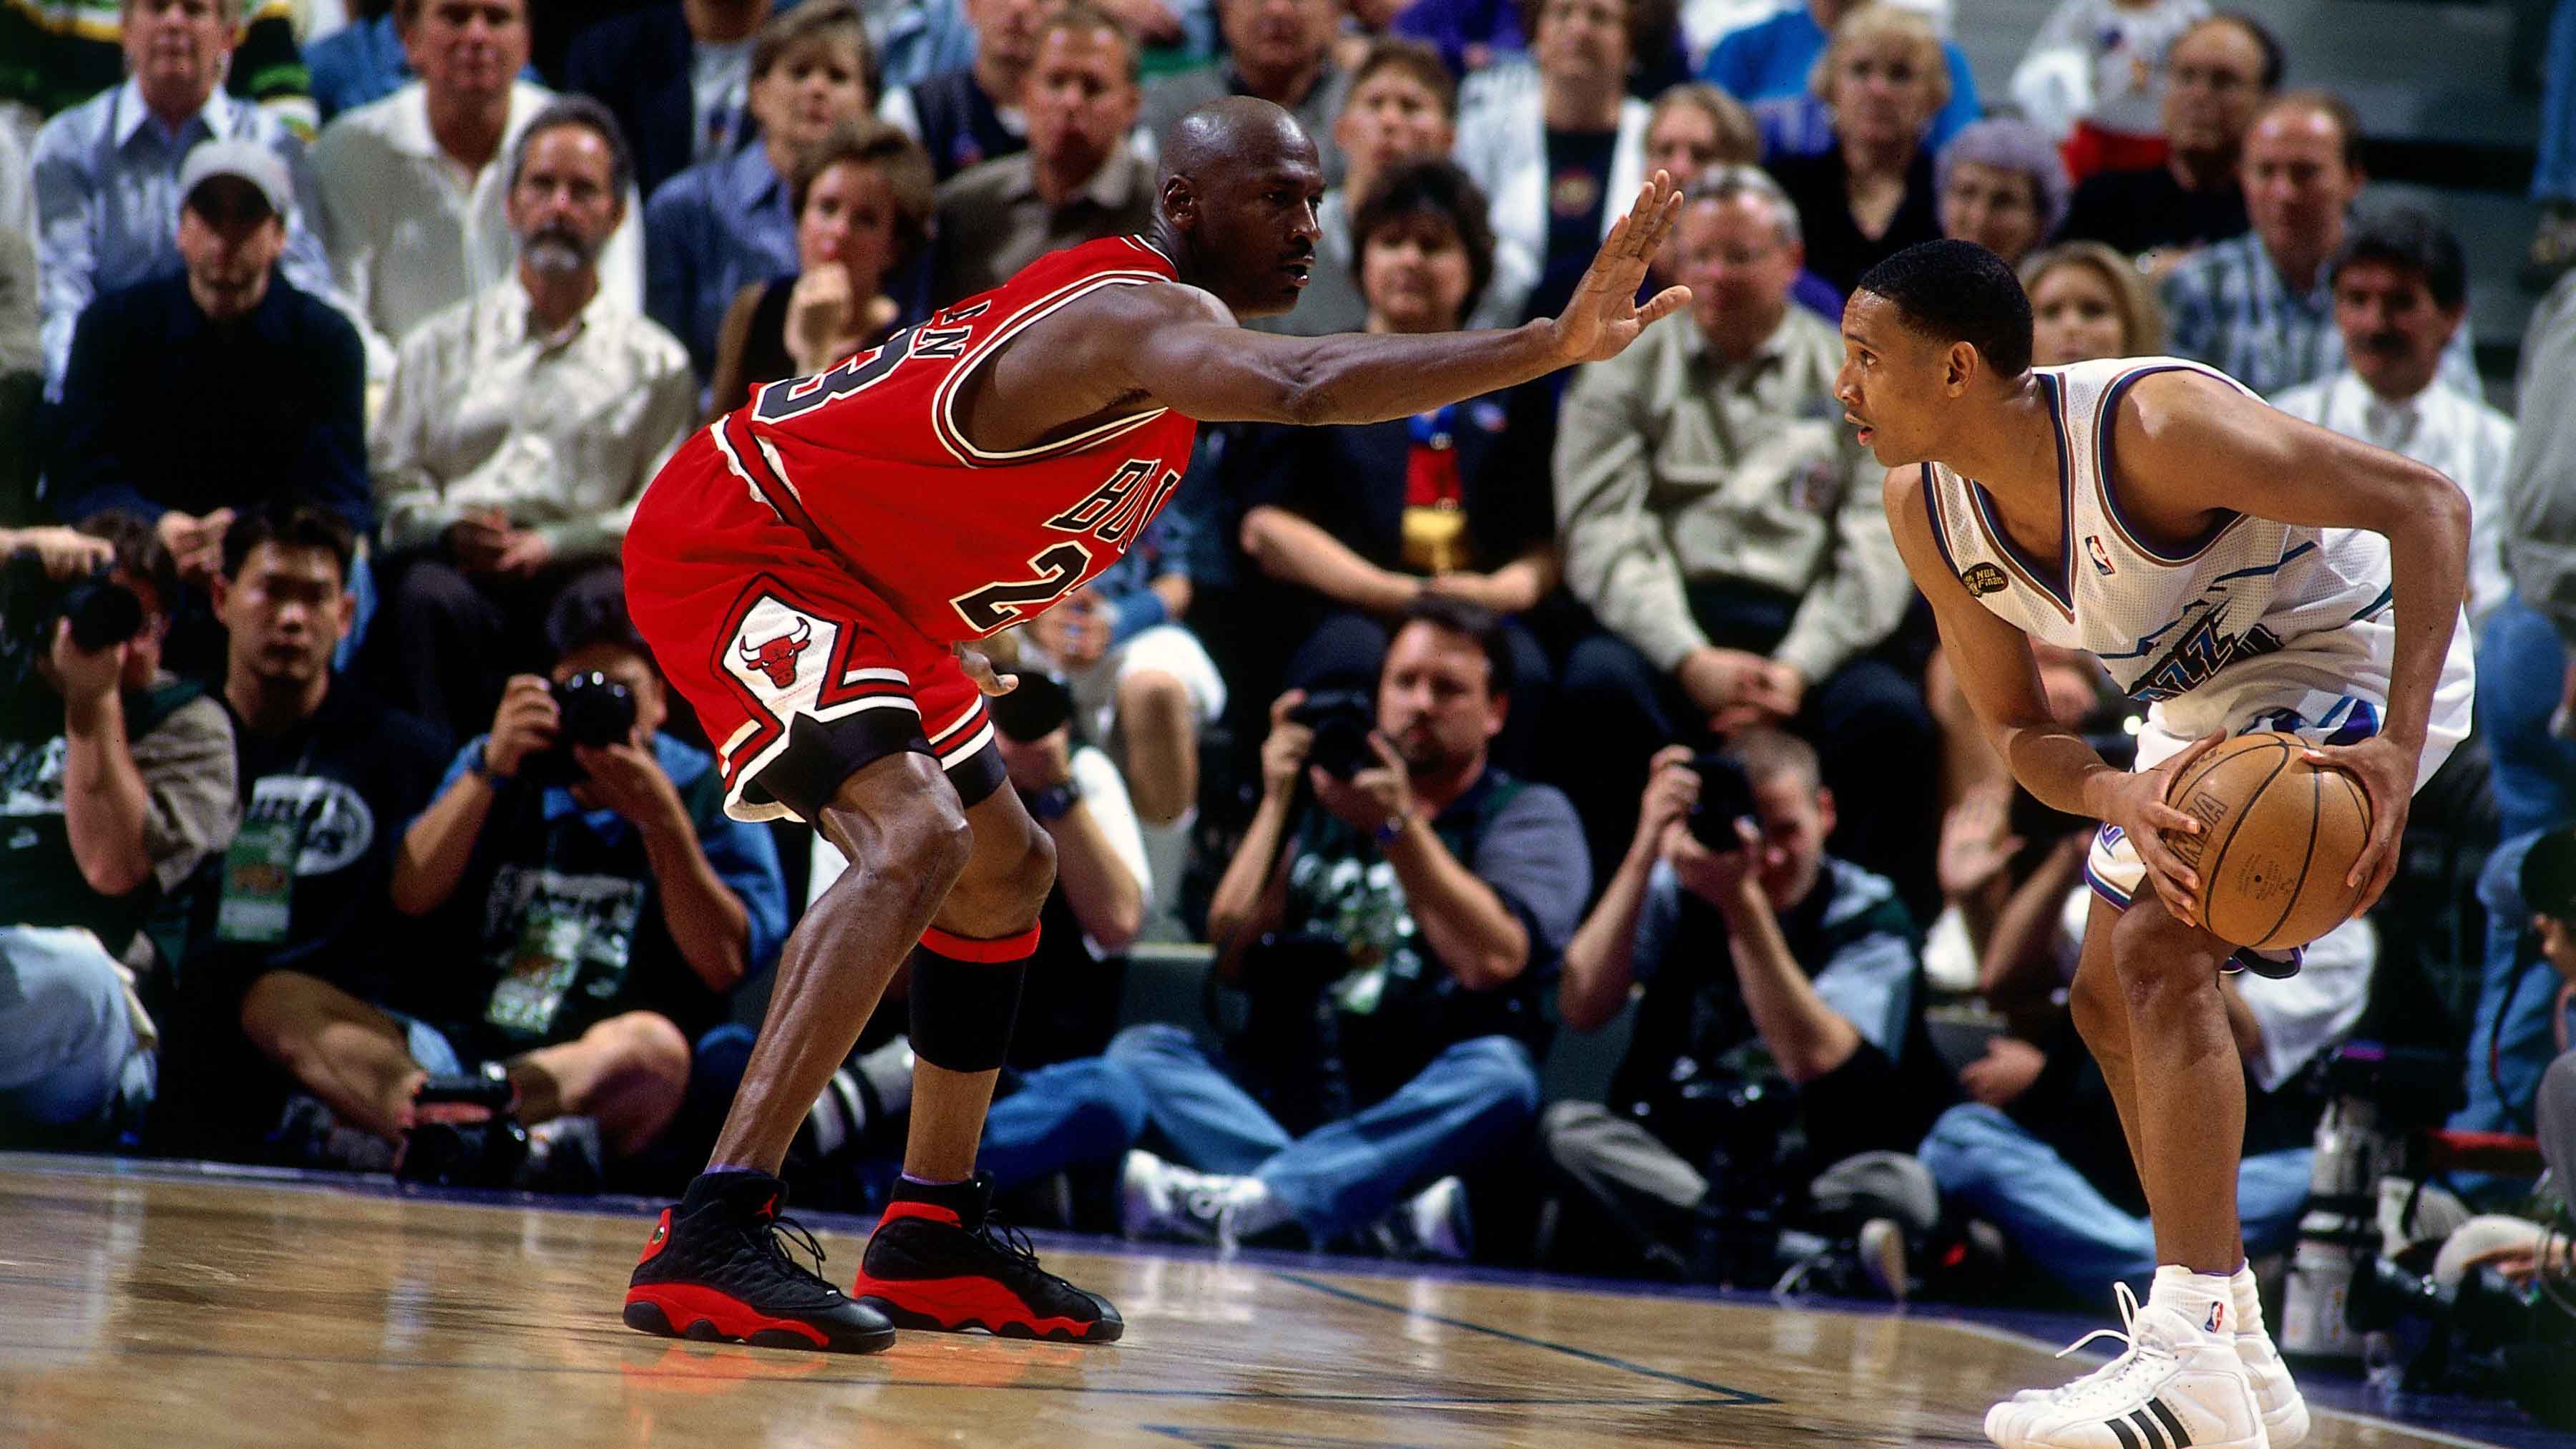 Michael Jordan's 1998 NBA Finals Air Jordan 13s become the most valuable  sneakers sold of ALL-TIME